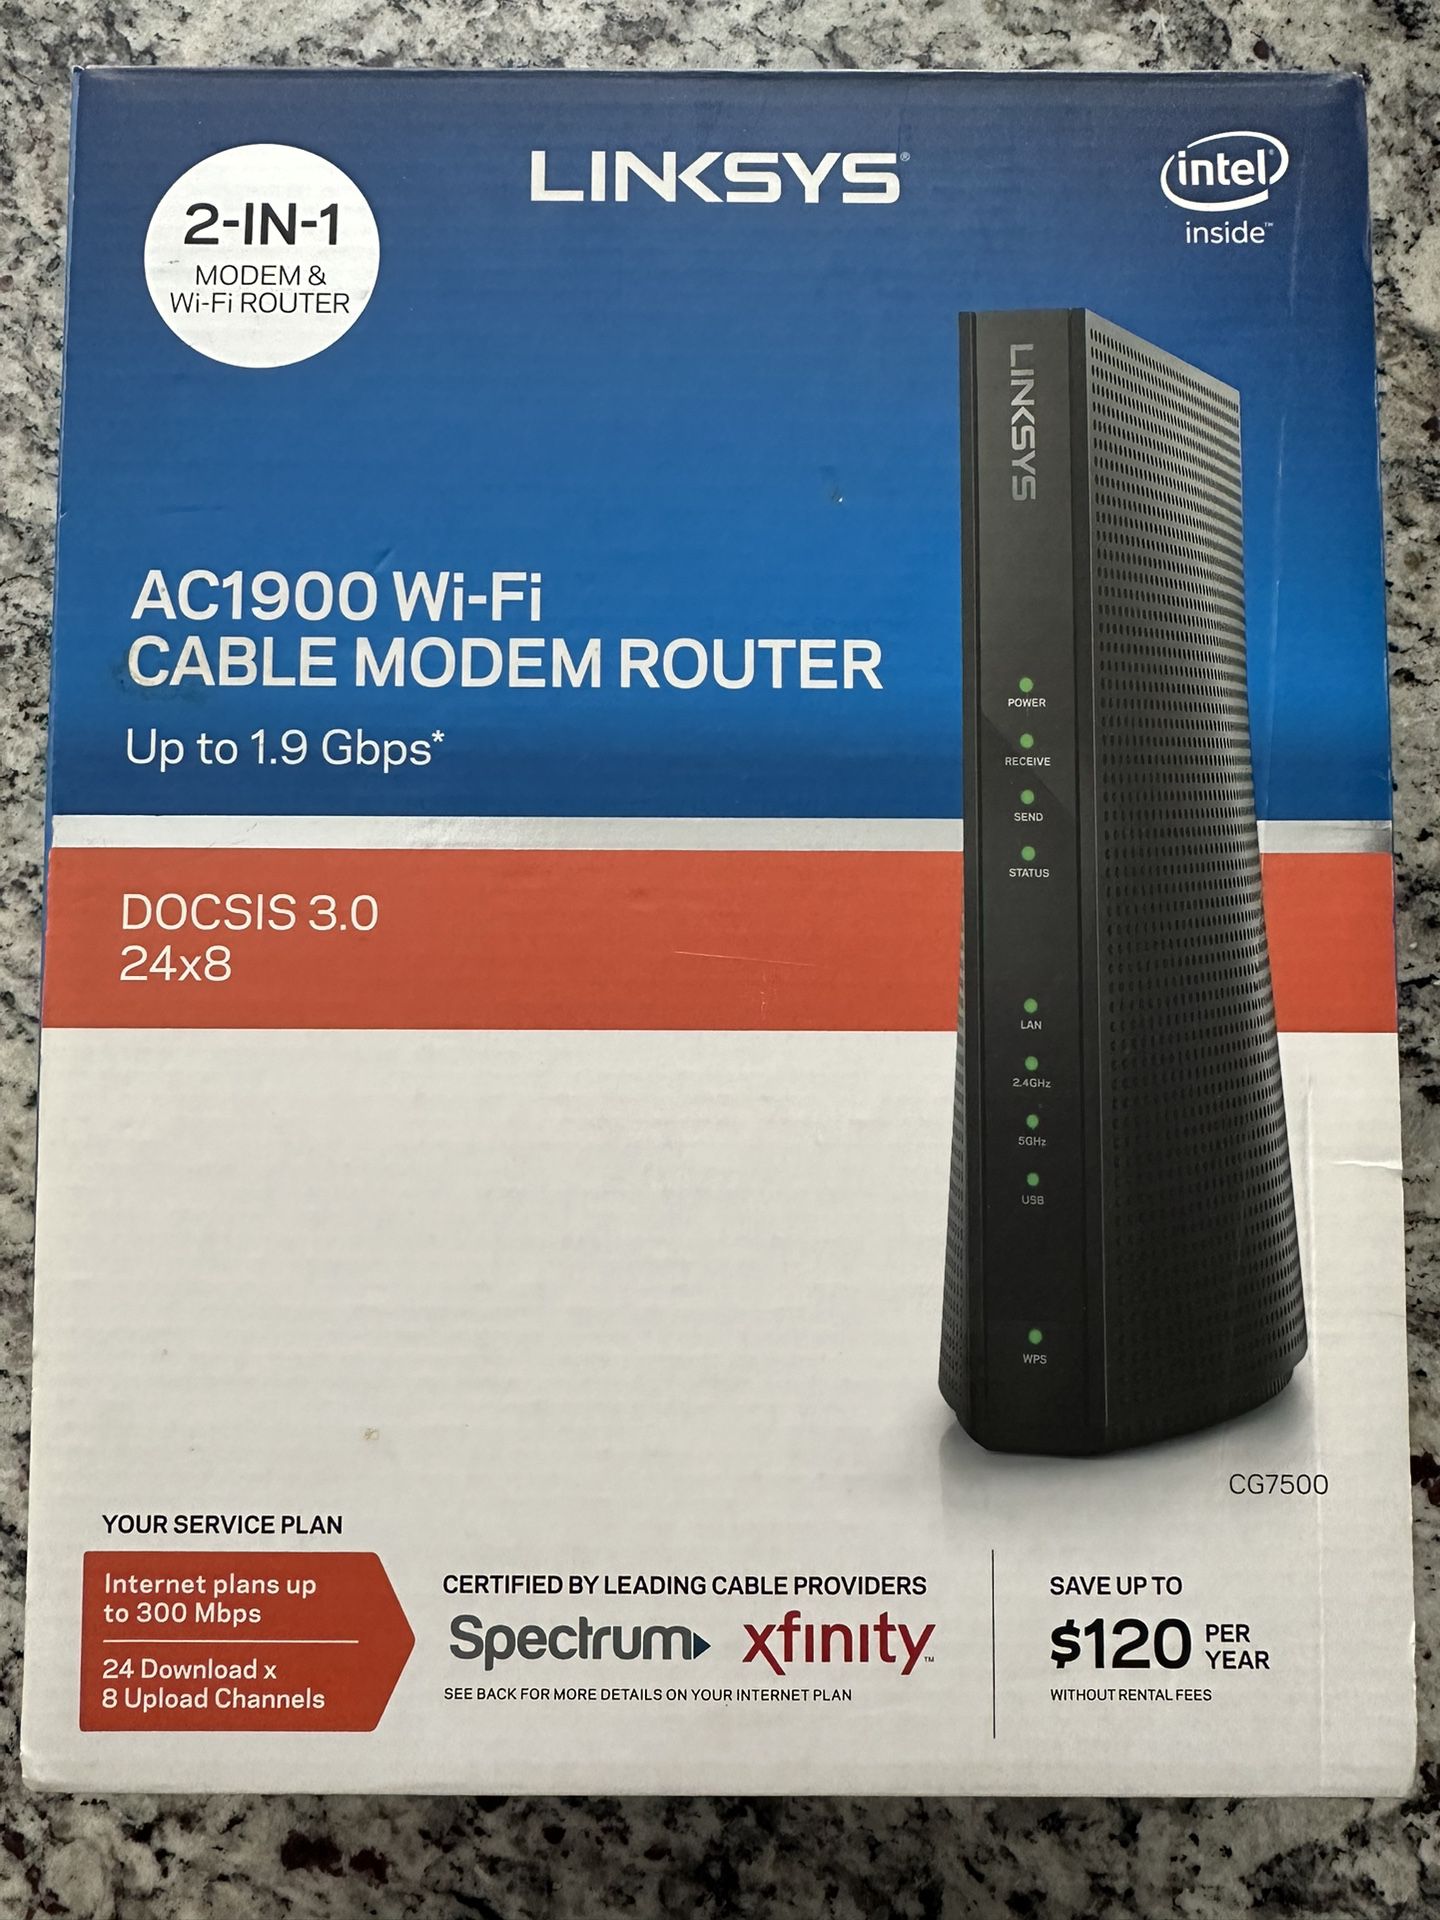 Linksys AC1900 Wi-Fi Cable Modem Router